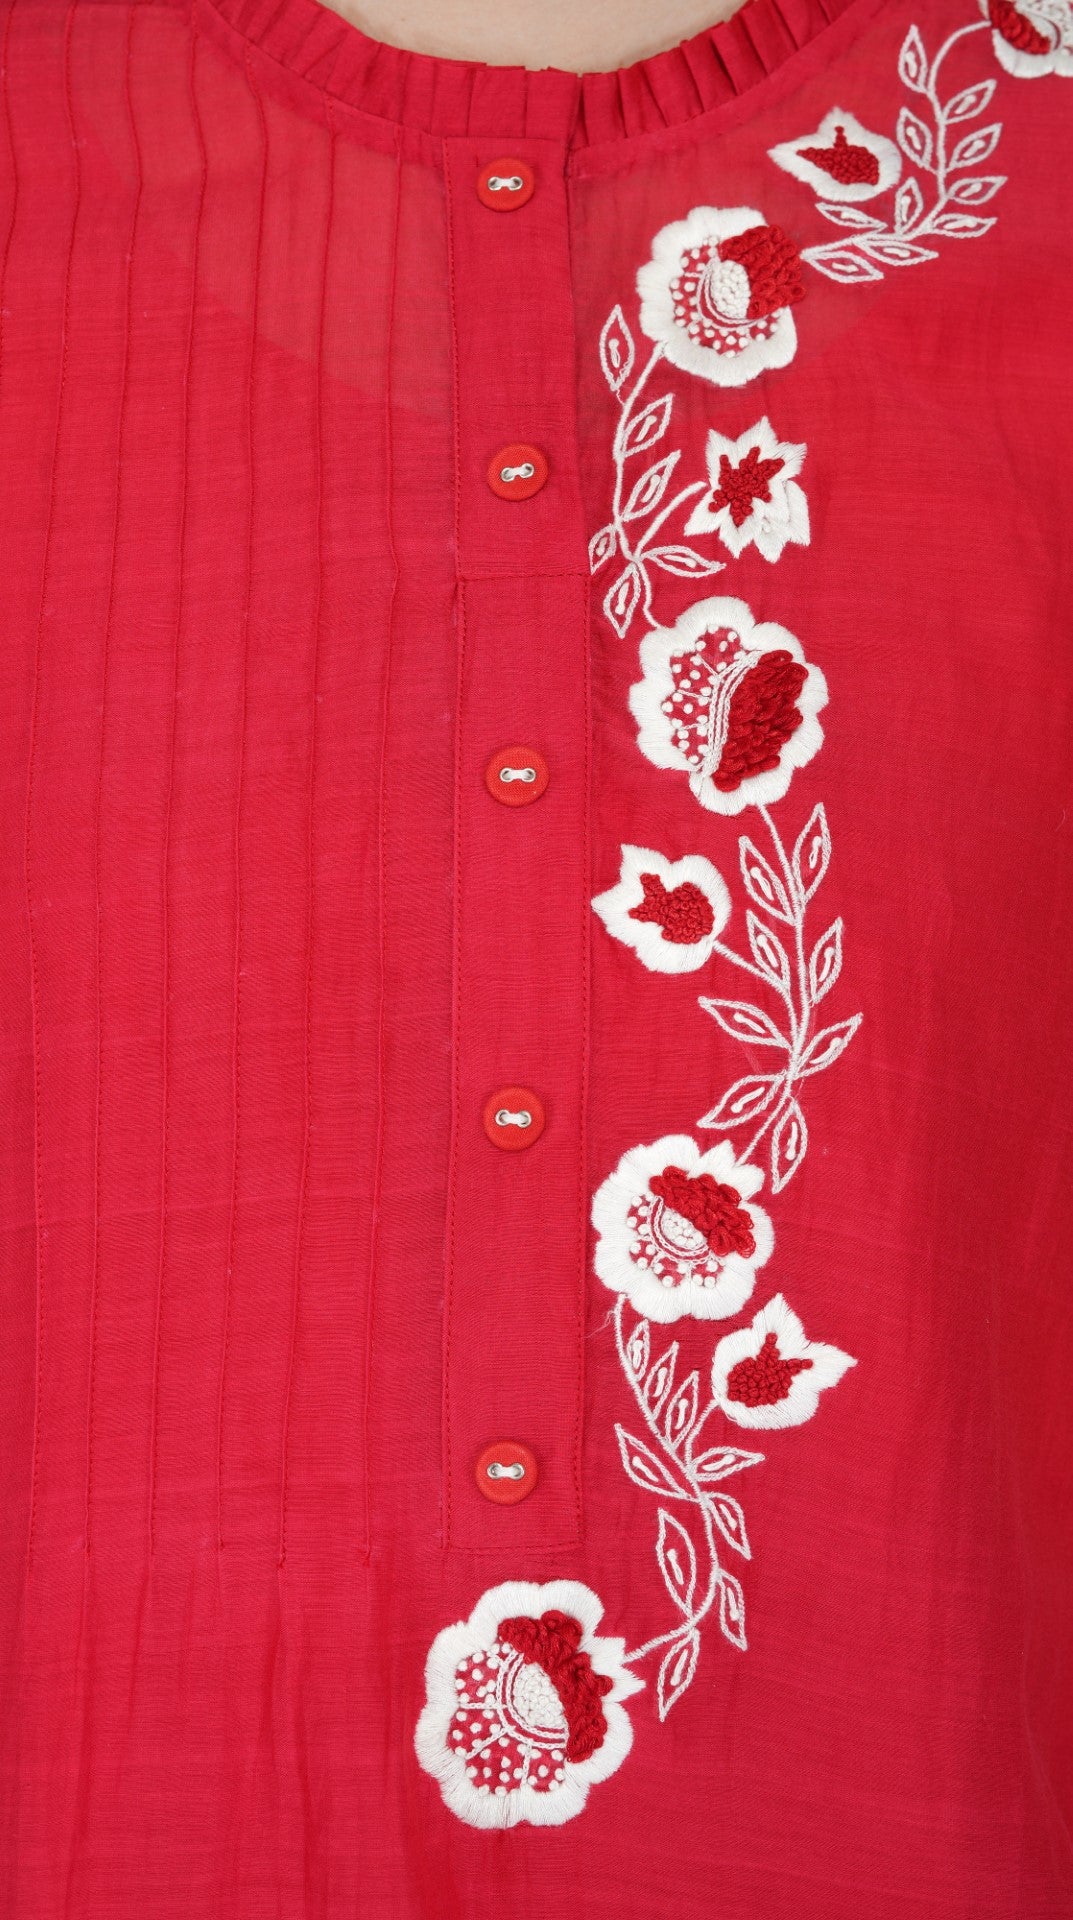 SAAWAN RED CHANDERI FLOWER EMBROIDERY WITH PINTUCKS TUNIC WITH RED COTTON ORGANZA SHEER PANTS